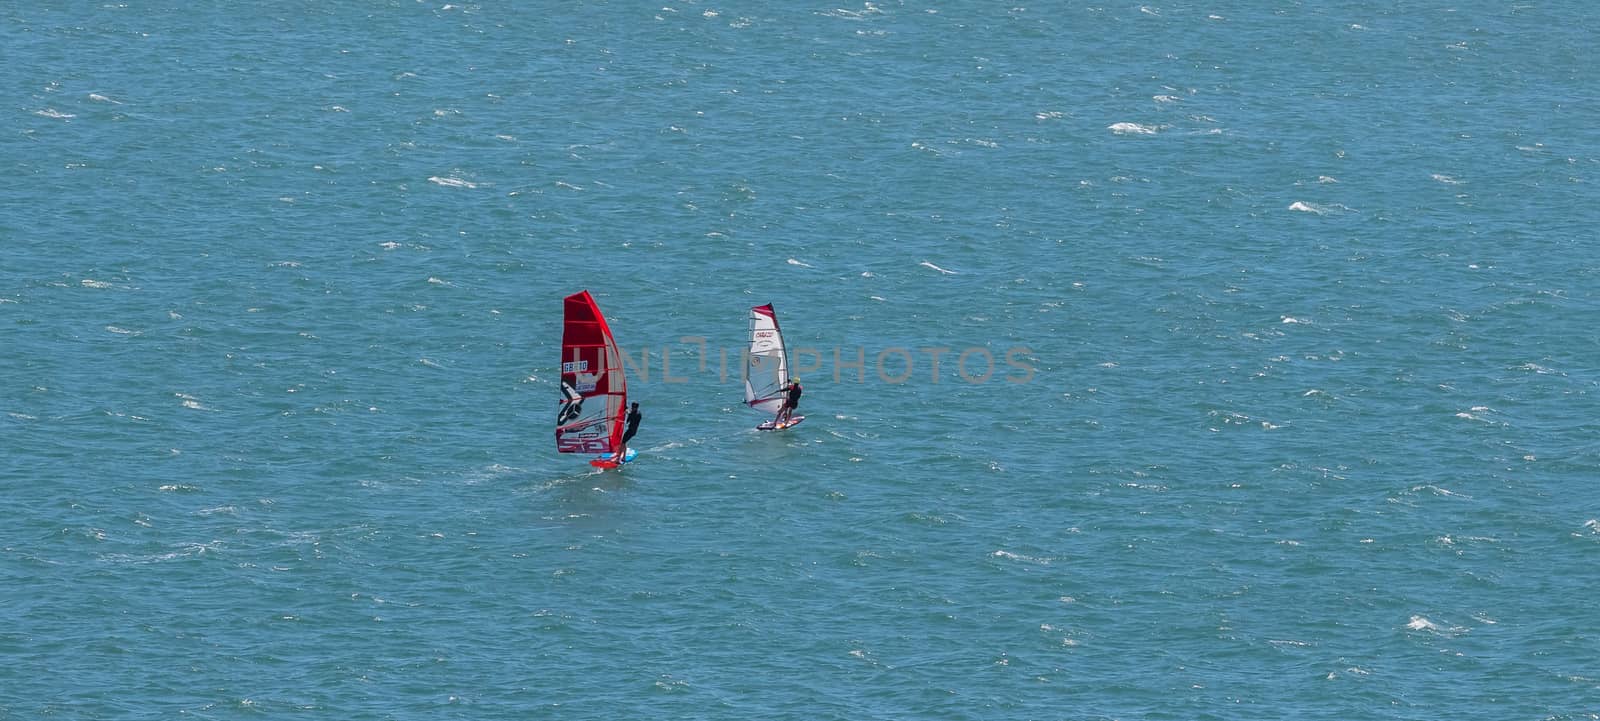 Shot of two sail boards with professional surfers by DamantisZ